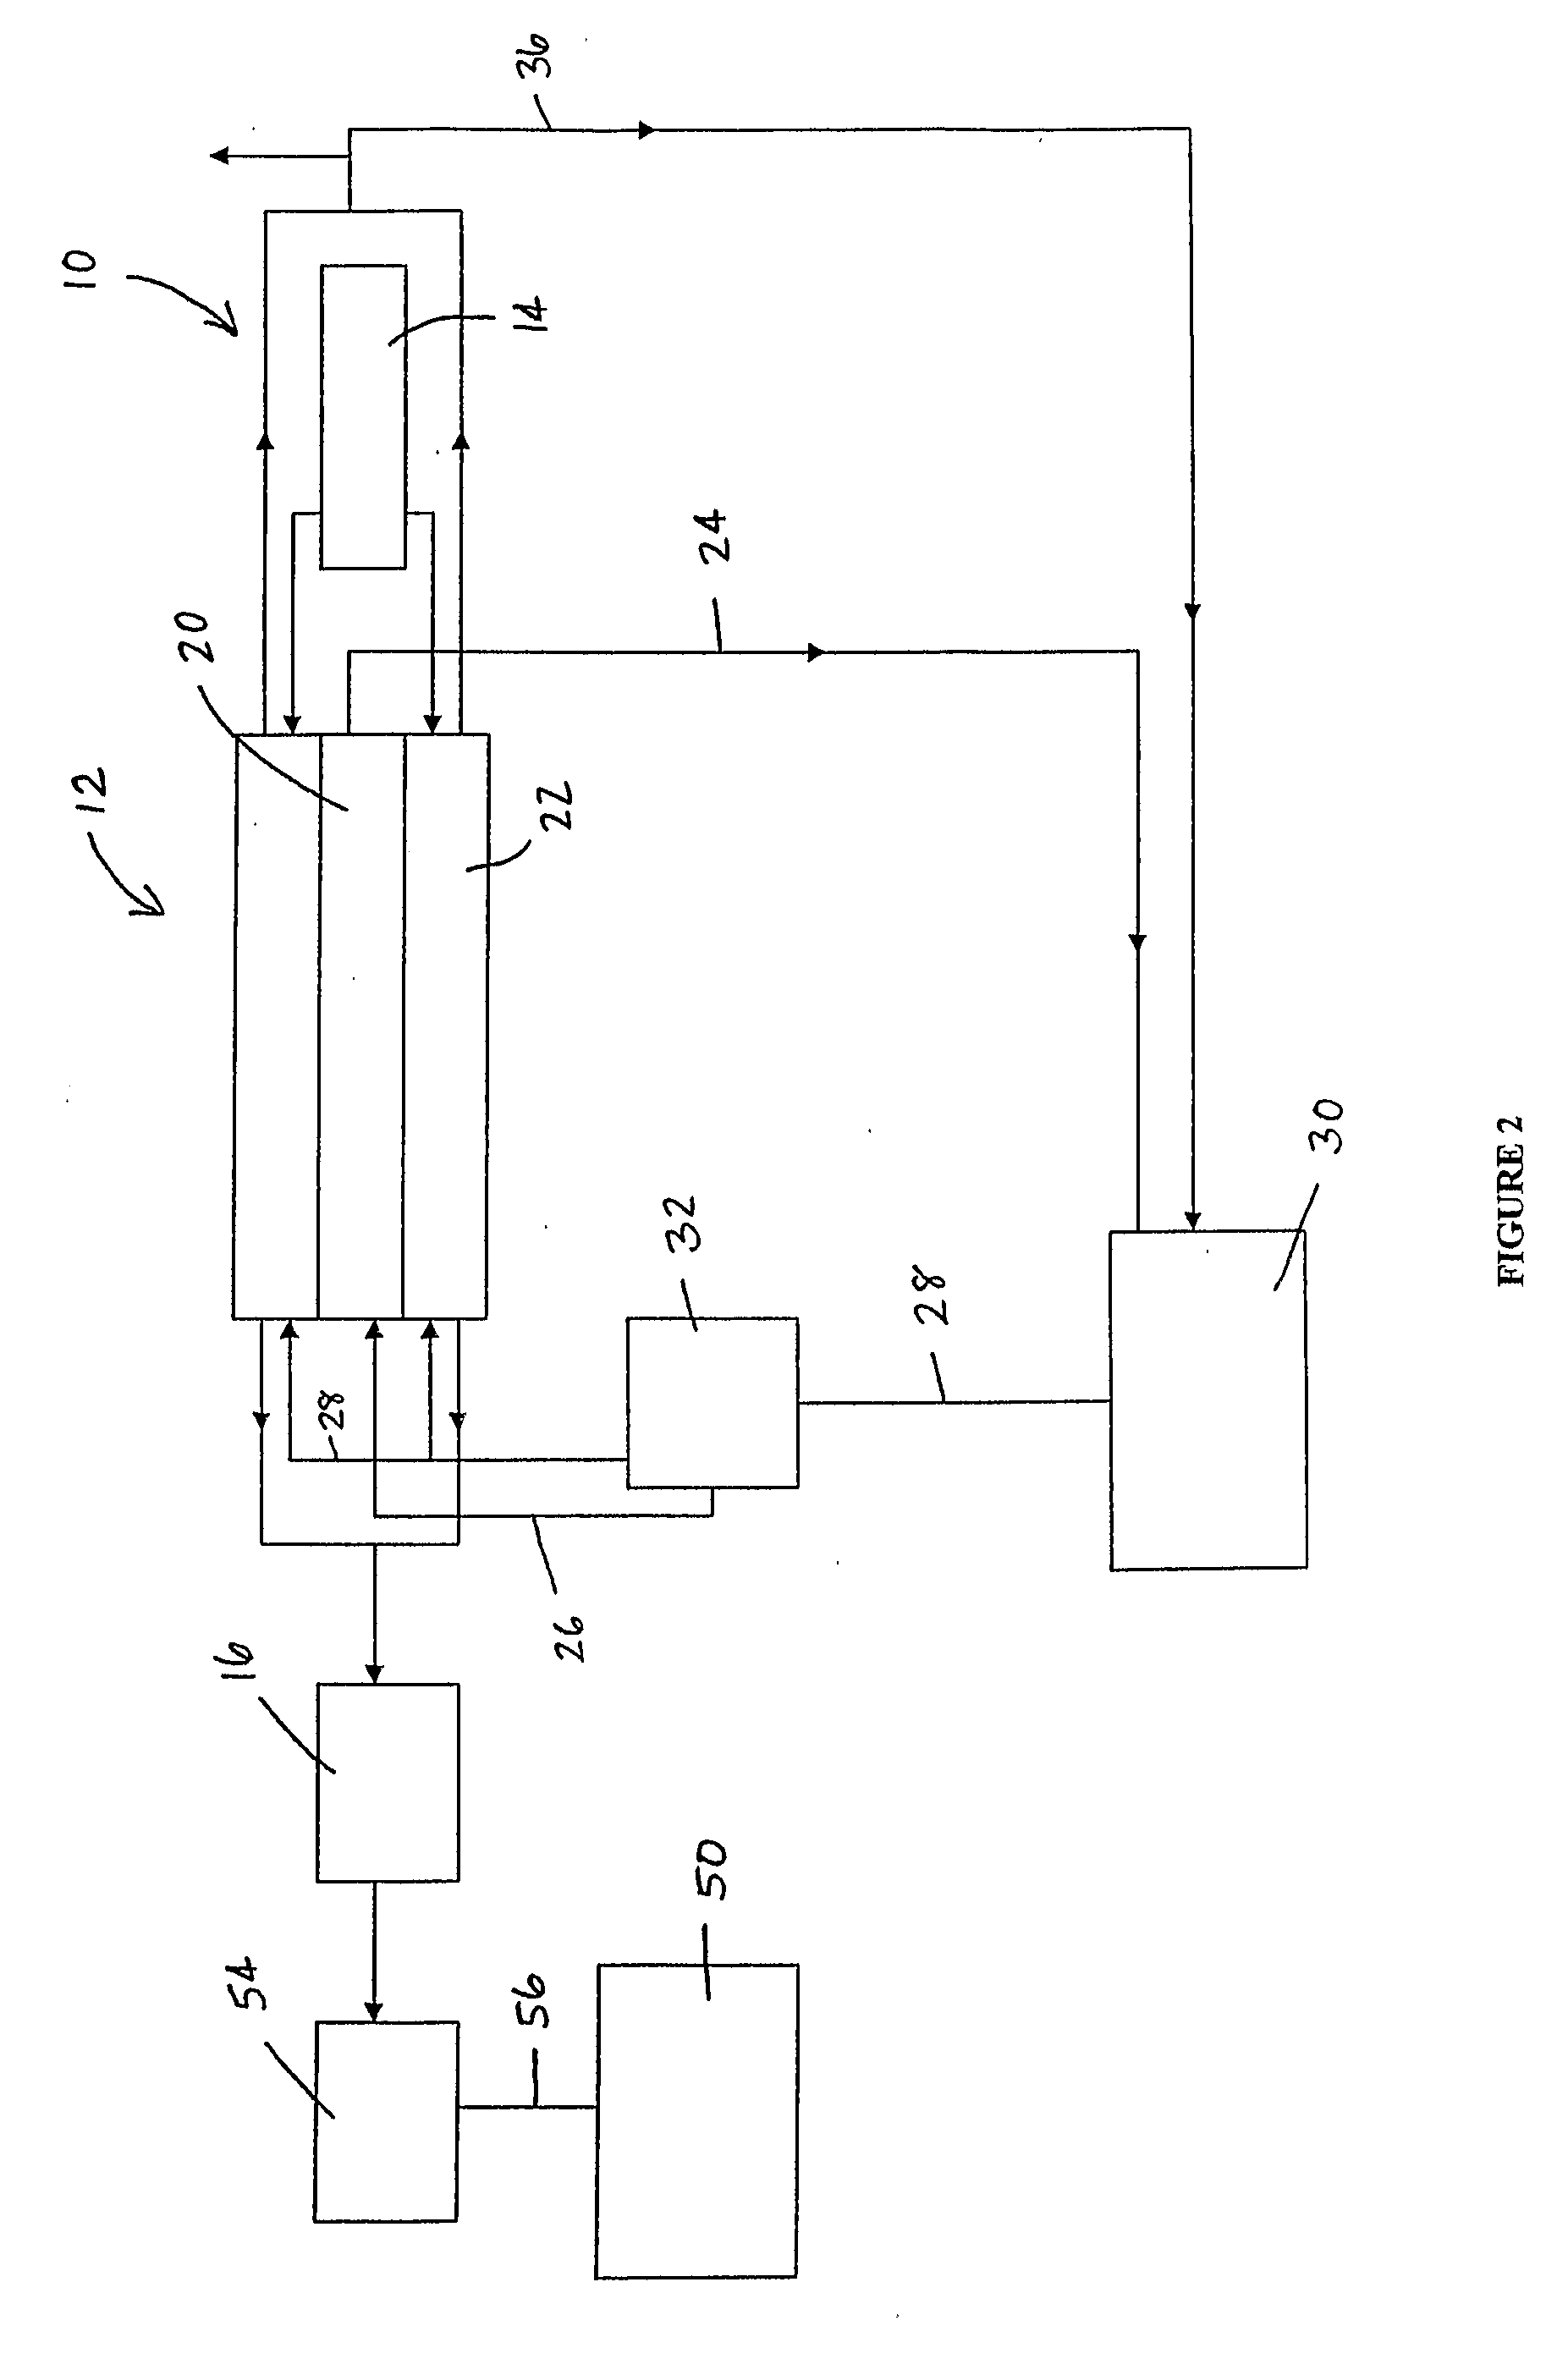 Process, system and apparatus for passivating carbonaceous materials